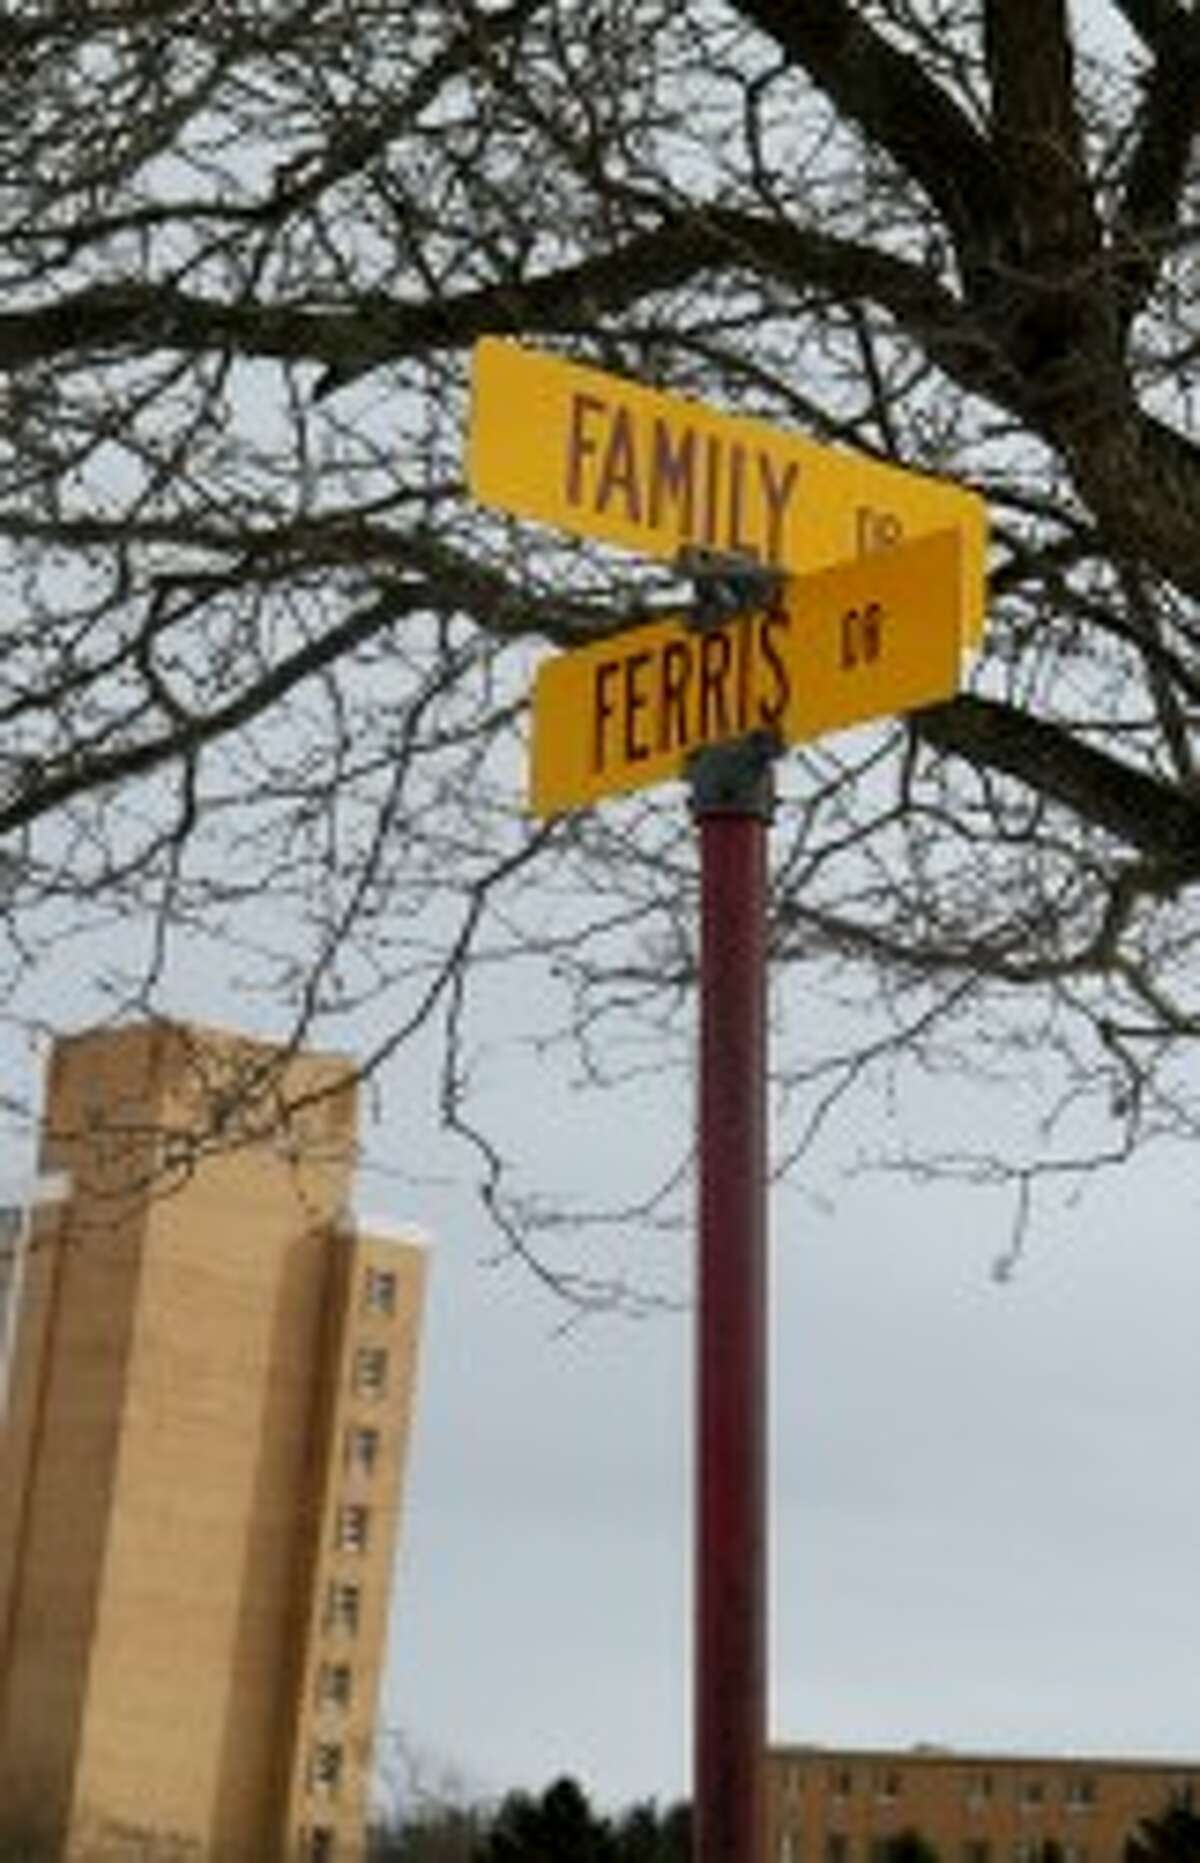 ON-CAMPUS NEIGHBORHOOD: Ferris State University’s West Campus Apartments are located on Ferris Drive and Family Drive. The complex includes townhouses that can be designated for families or single students, depending on demand.